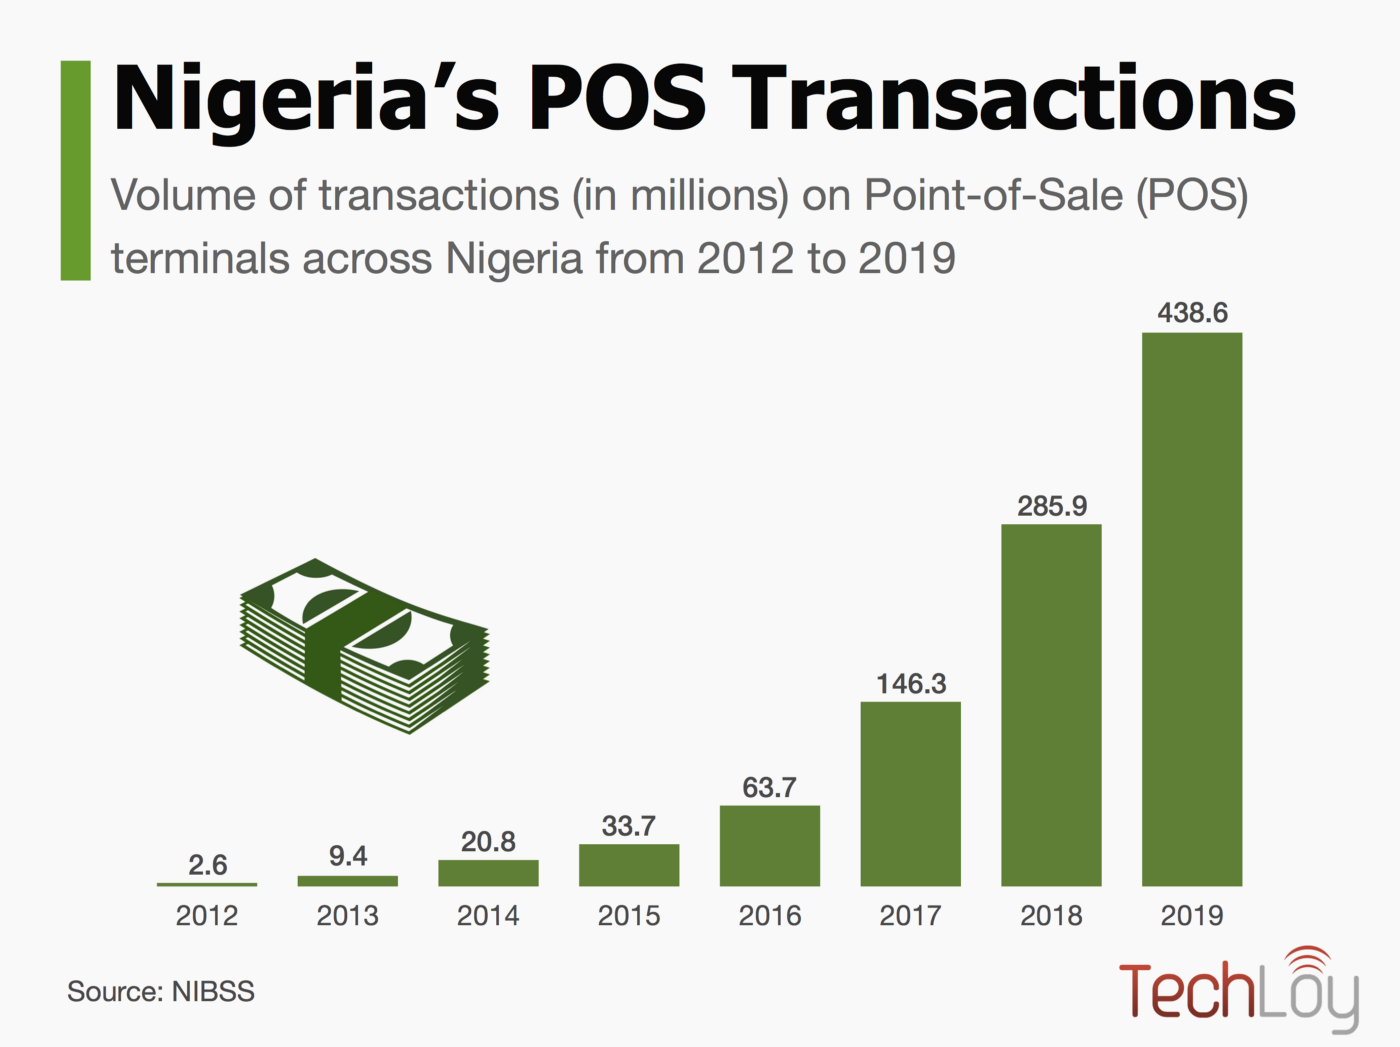 Nigeria recorded 439 million in PoS transaction volume and ₦3.2 trillion in transaction value in 2019